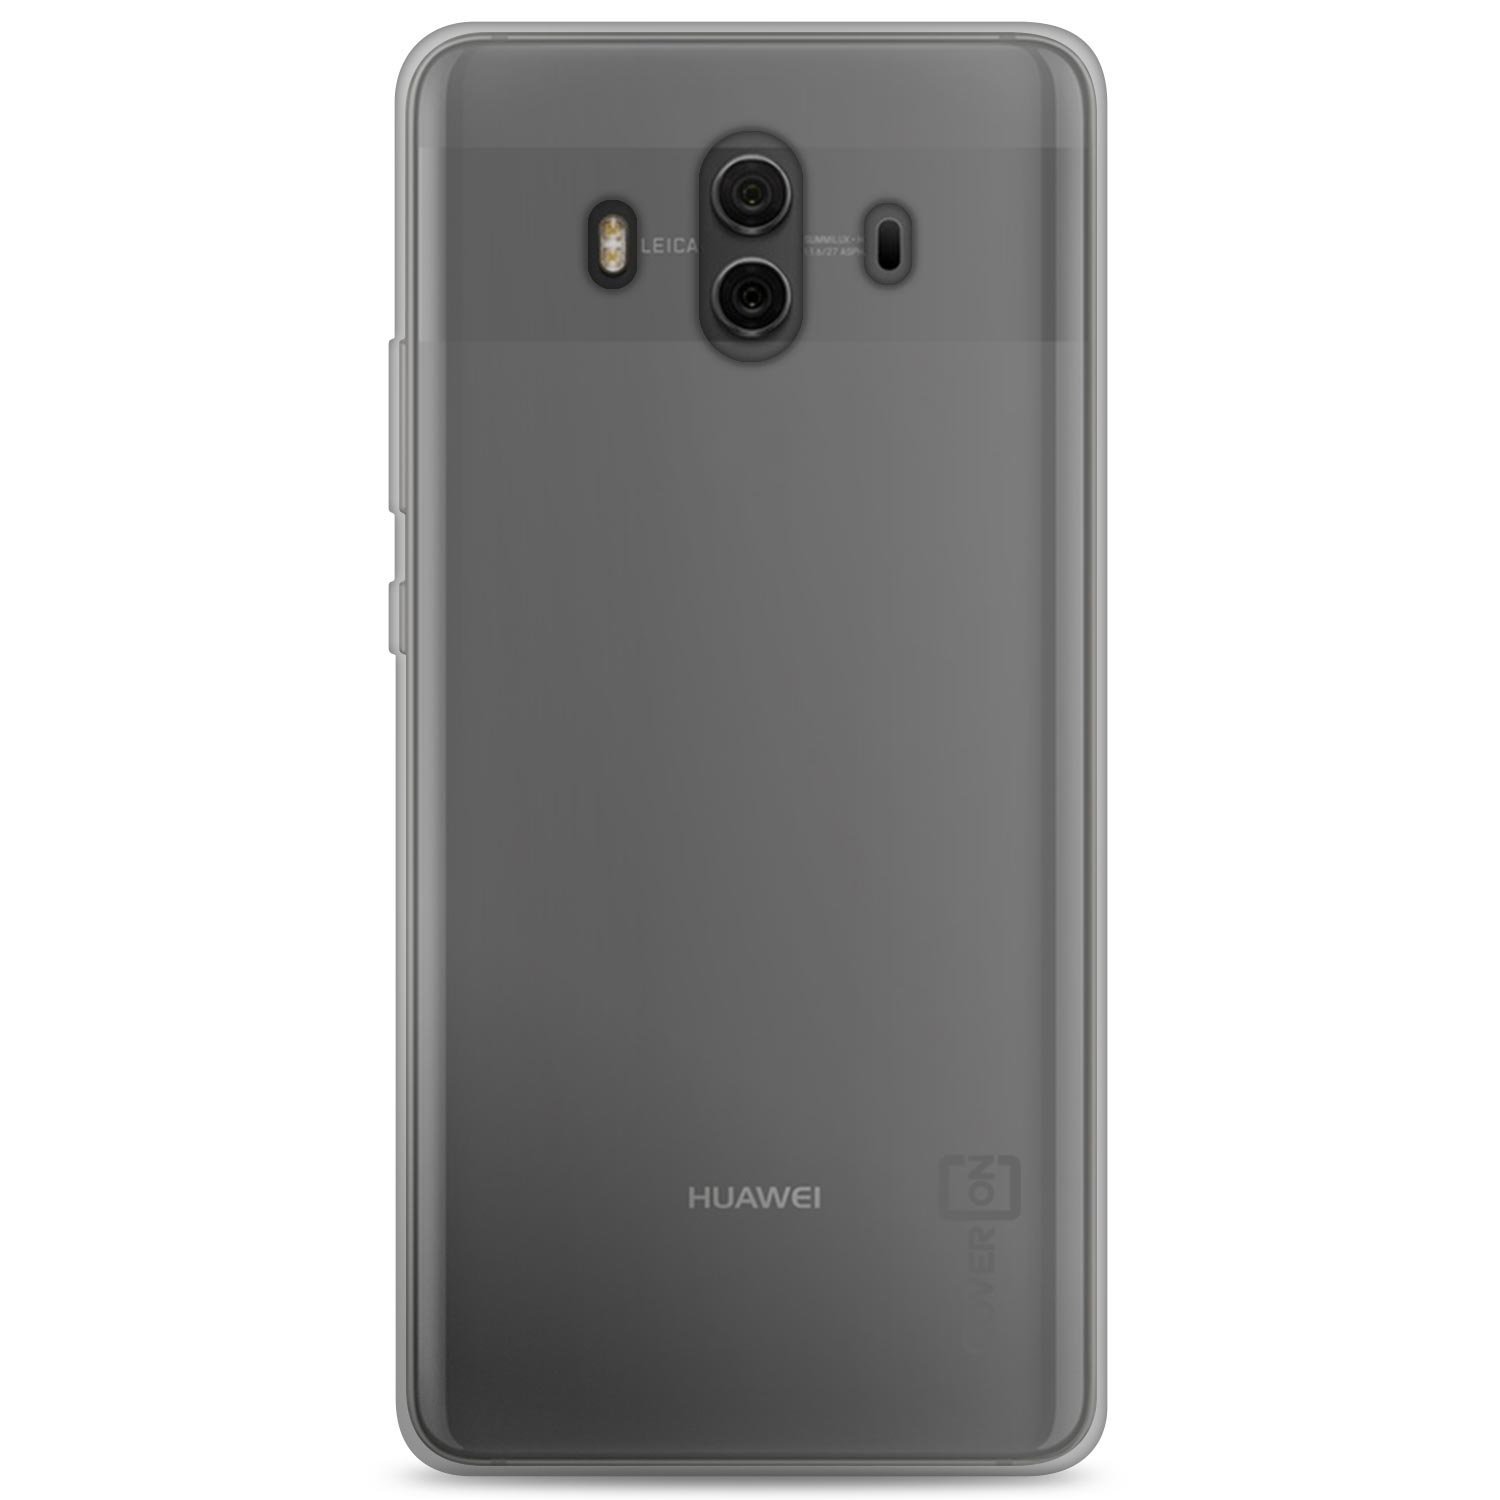 CoverOn case - HUAWEI Mate 10 cases